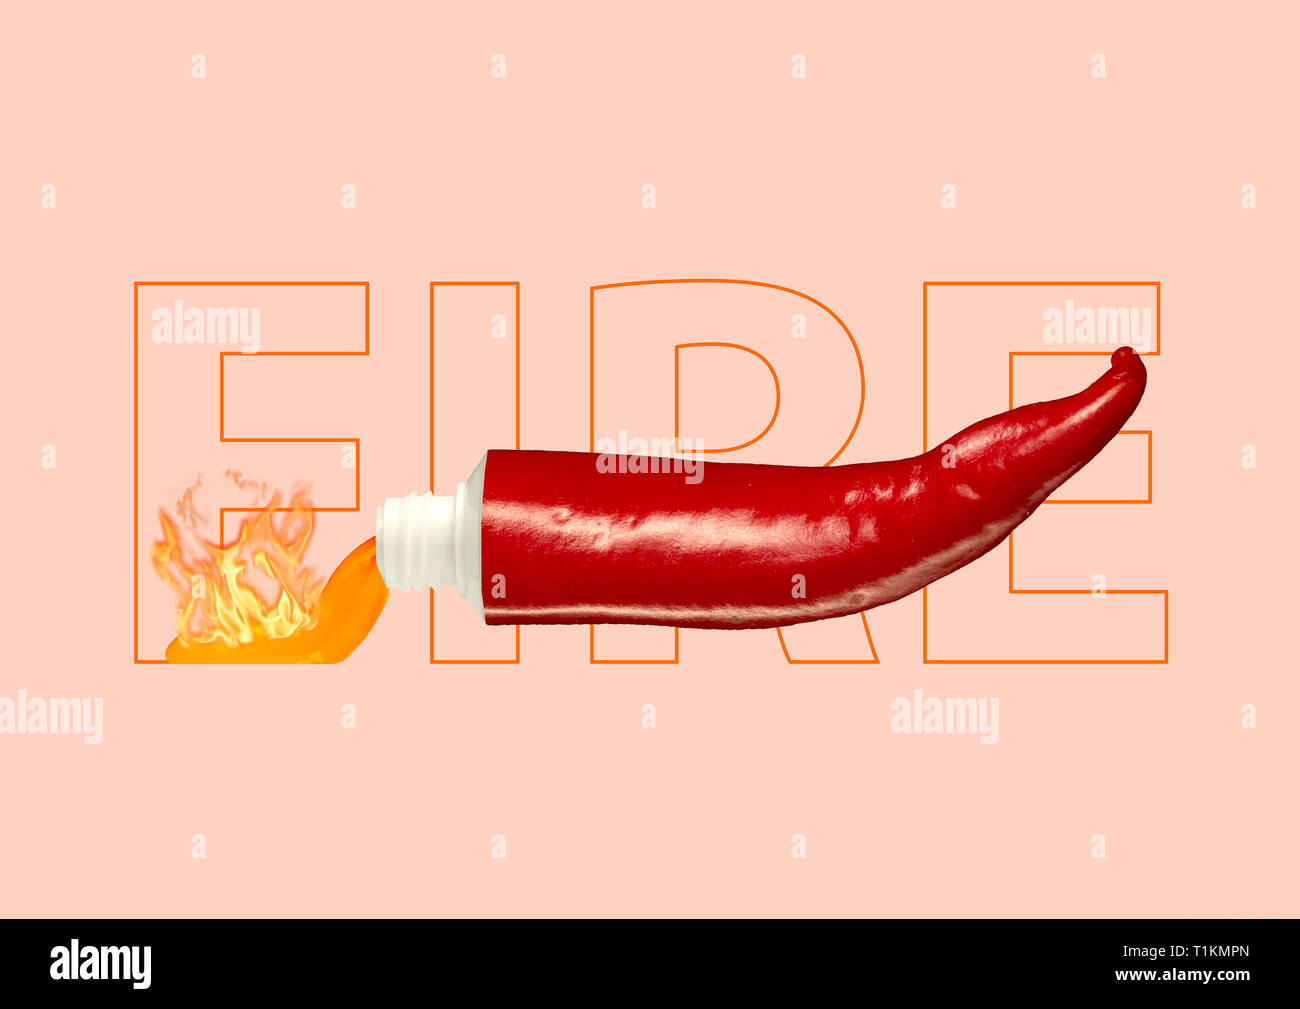 Seasoning hot chili sauce. Push and add fire to your bland days. Red pepper shaped tube with flaming waves against coral background. Modern design. Contemporary pop-art collage. Stock Photo